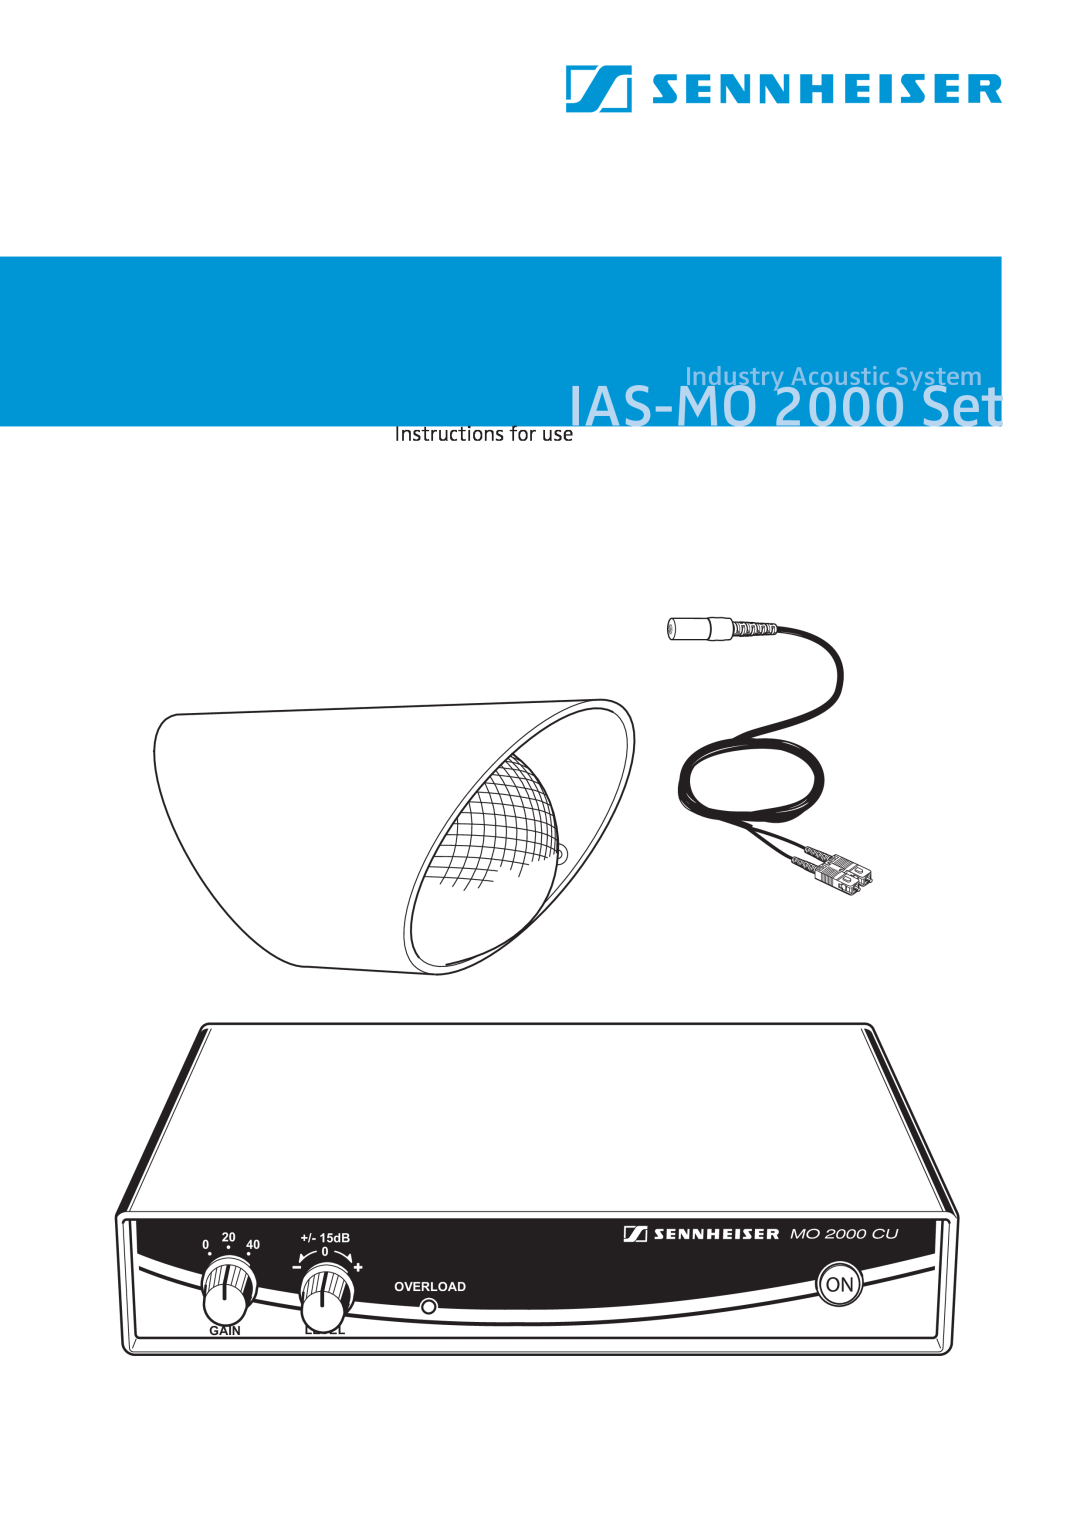 Sennheiser manual IAS-MO 2000 Set, Industry Acoustic System, Instructions for use, 0 20, Overload, Level, Gain 